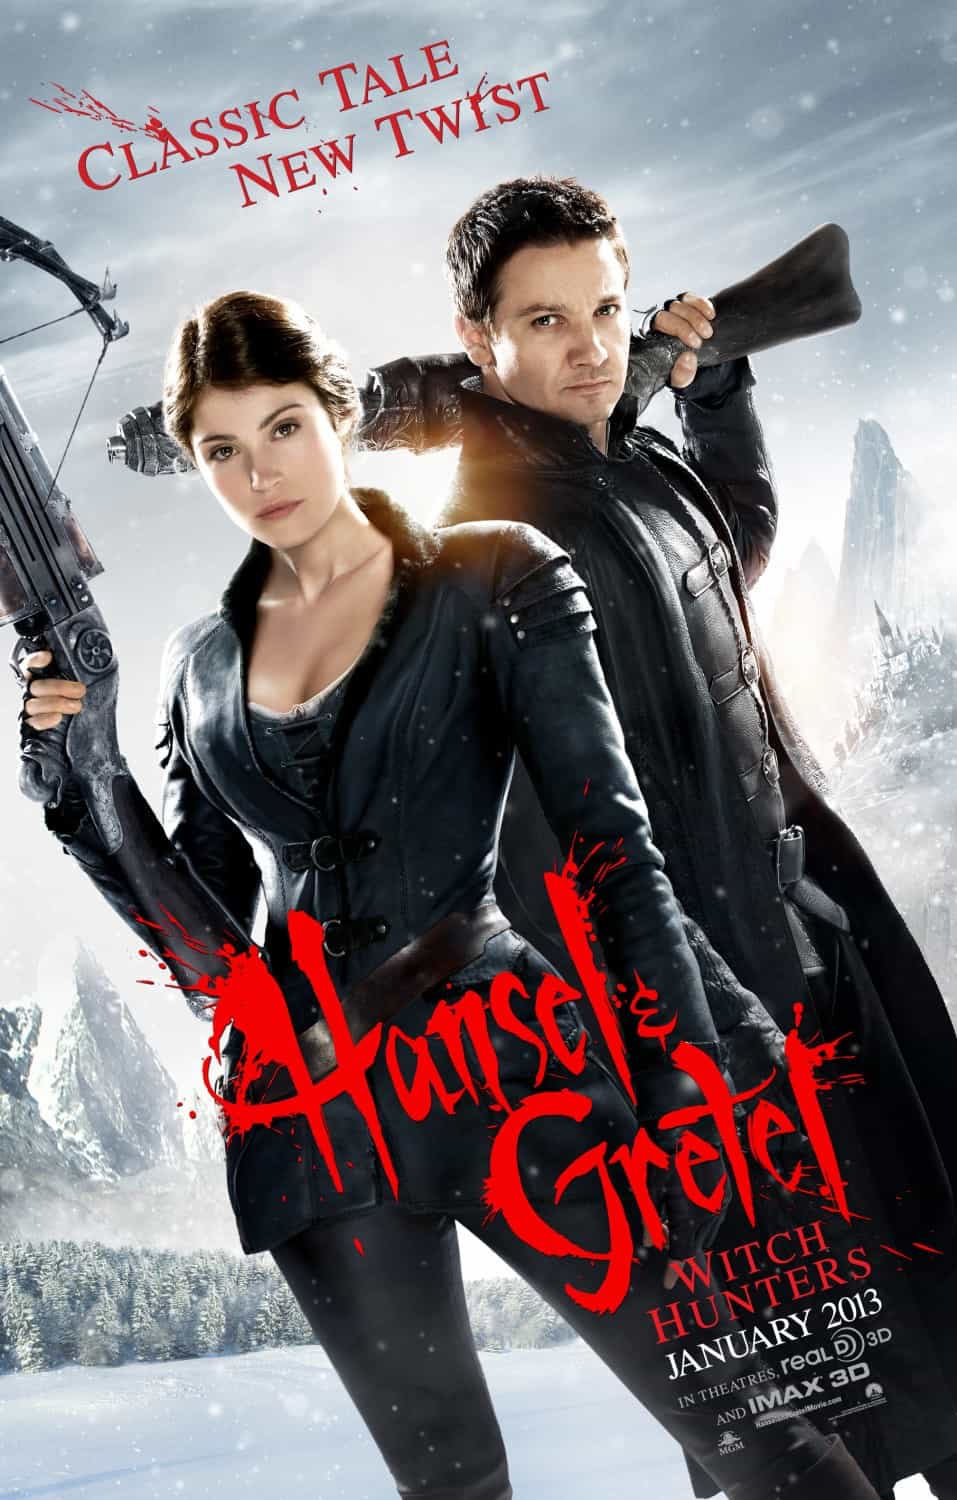 UK Box Office Report: Hansel and Gretel debut at the top.